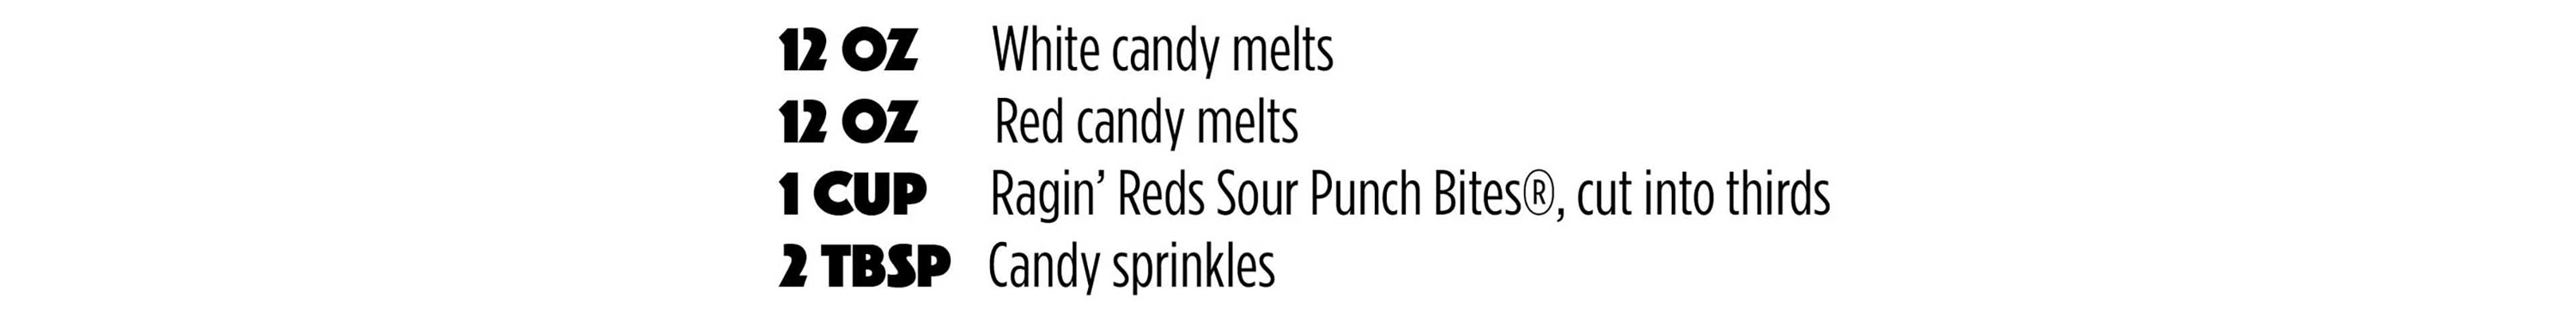 12oz White candy melts / 12oz Red candy melts / 1 CUP Ragin' Reds Sour Punch Bites, cut into thirds / 2 TBSP Candy sprinkles